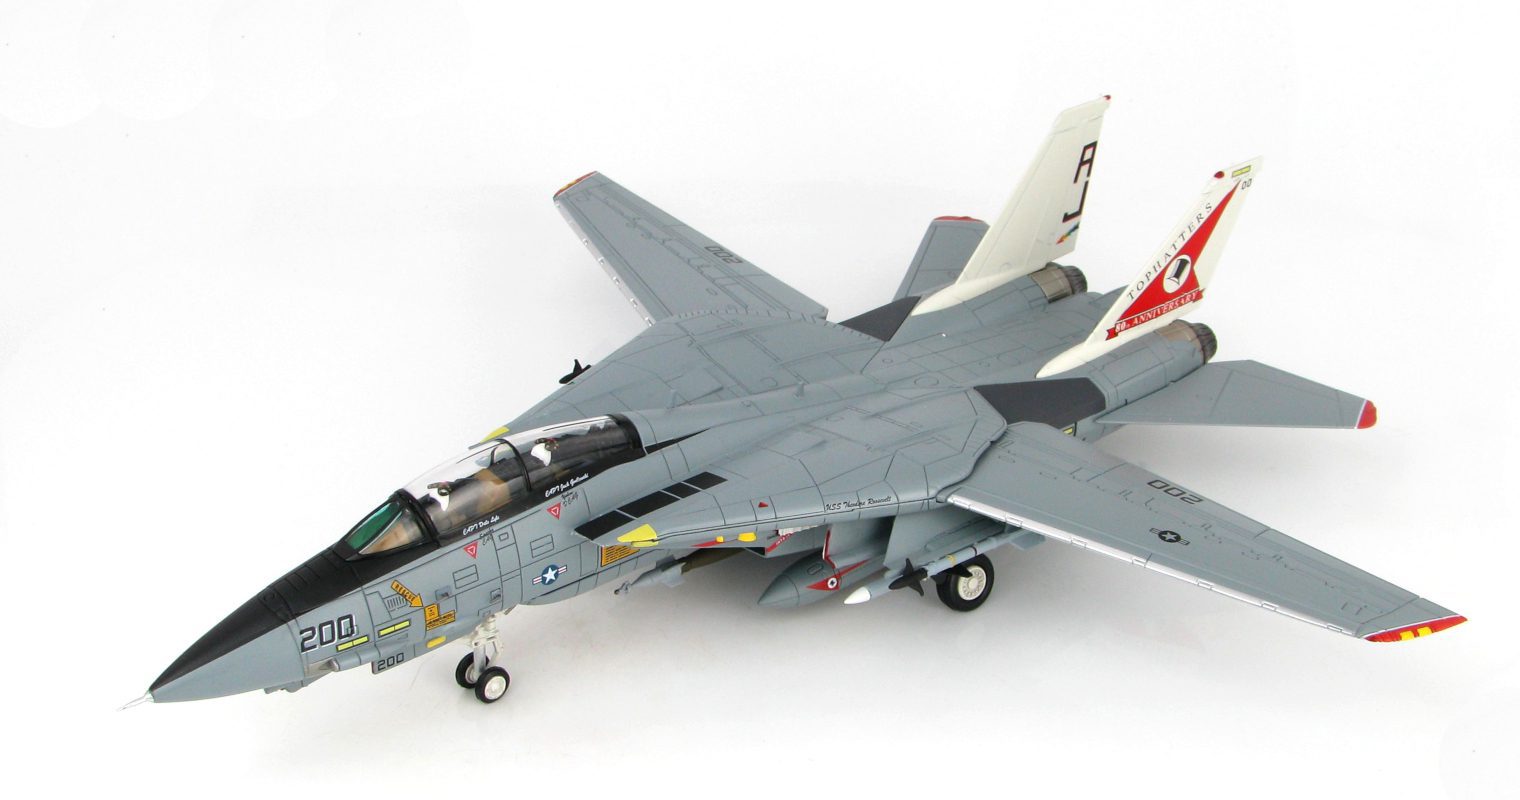 Front port side view of the Grumman F-14A Tomcat 1/72 scale diecast model of the VF-14 